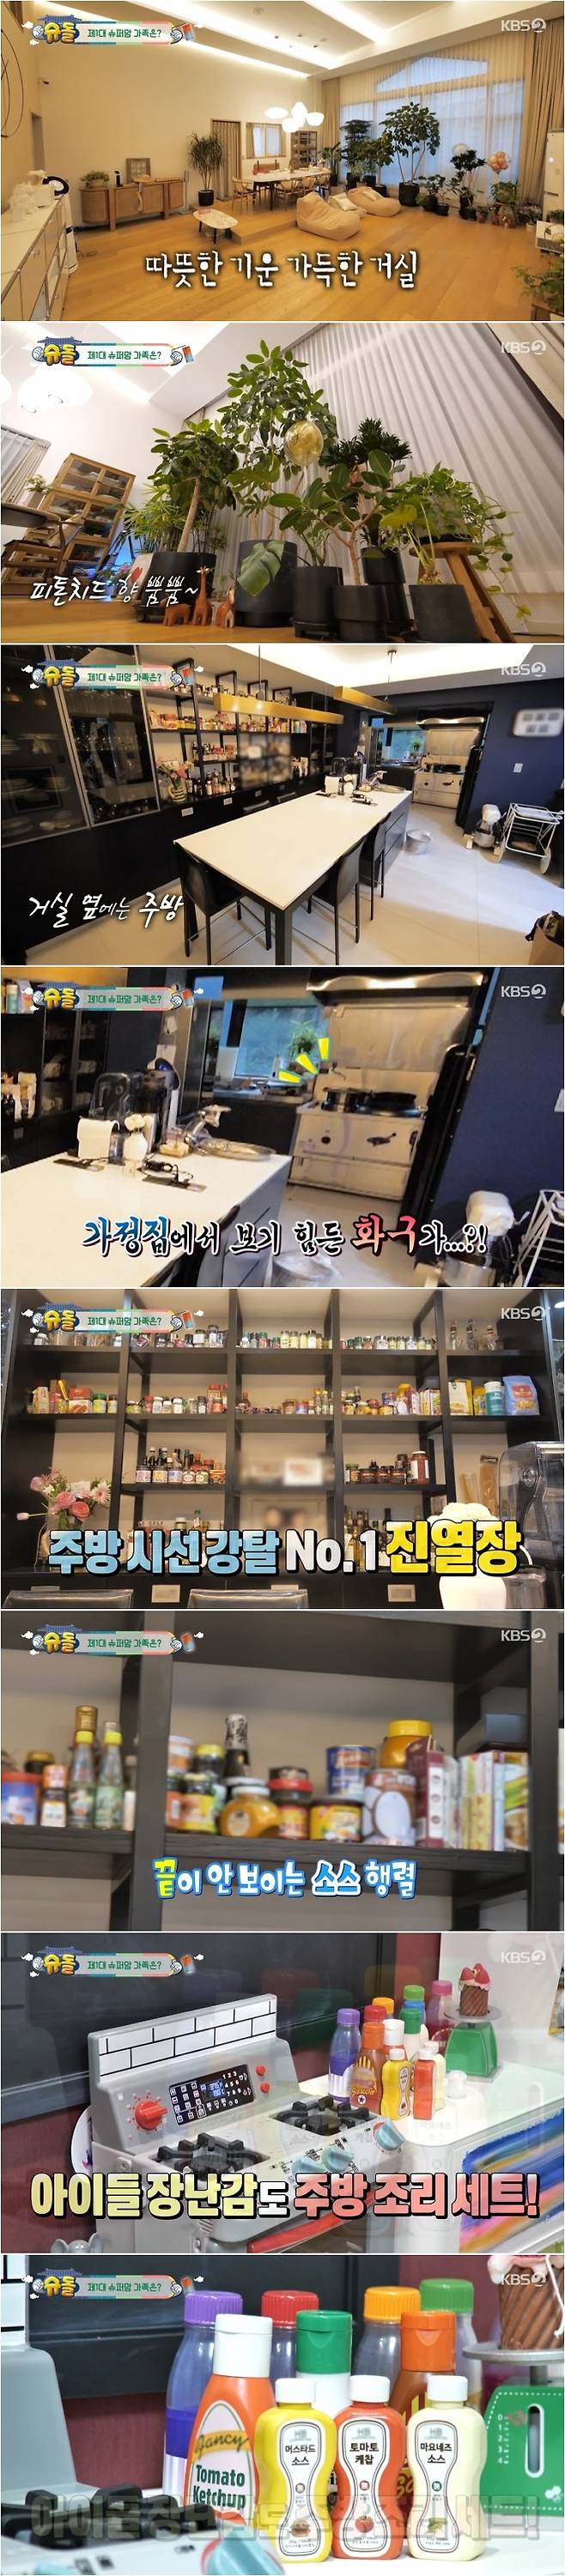 The special space of the Baek Jong-won So Yoo-jin couple, The Kitchen, was unveiled.On September 19, KBS 2TV The Return of Superman revealed the daily life of the Baek Jong-won So Yoo-jin couple, 8-year-old Yonghee, 7-year-old Seo Hyun and 4-year-old three siblings.The house of the Baek Jong-won So Yoo-jin was unveiled on the day; the most prominent place in a warm and modern atmosphere was The Kitchen.Like the house of Baek Jong-won, there was a hard-to-see Bolide installed in the house, so it was enough to attract Eye-catching.The display, filled with various spices and sauces, also impressed.